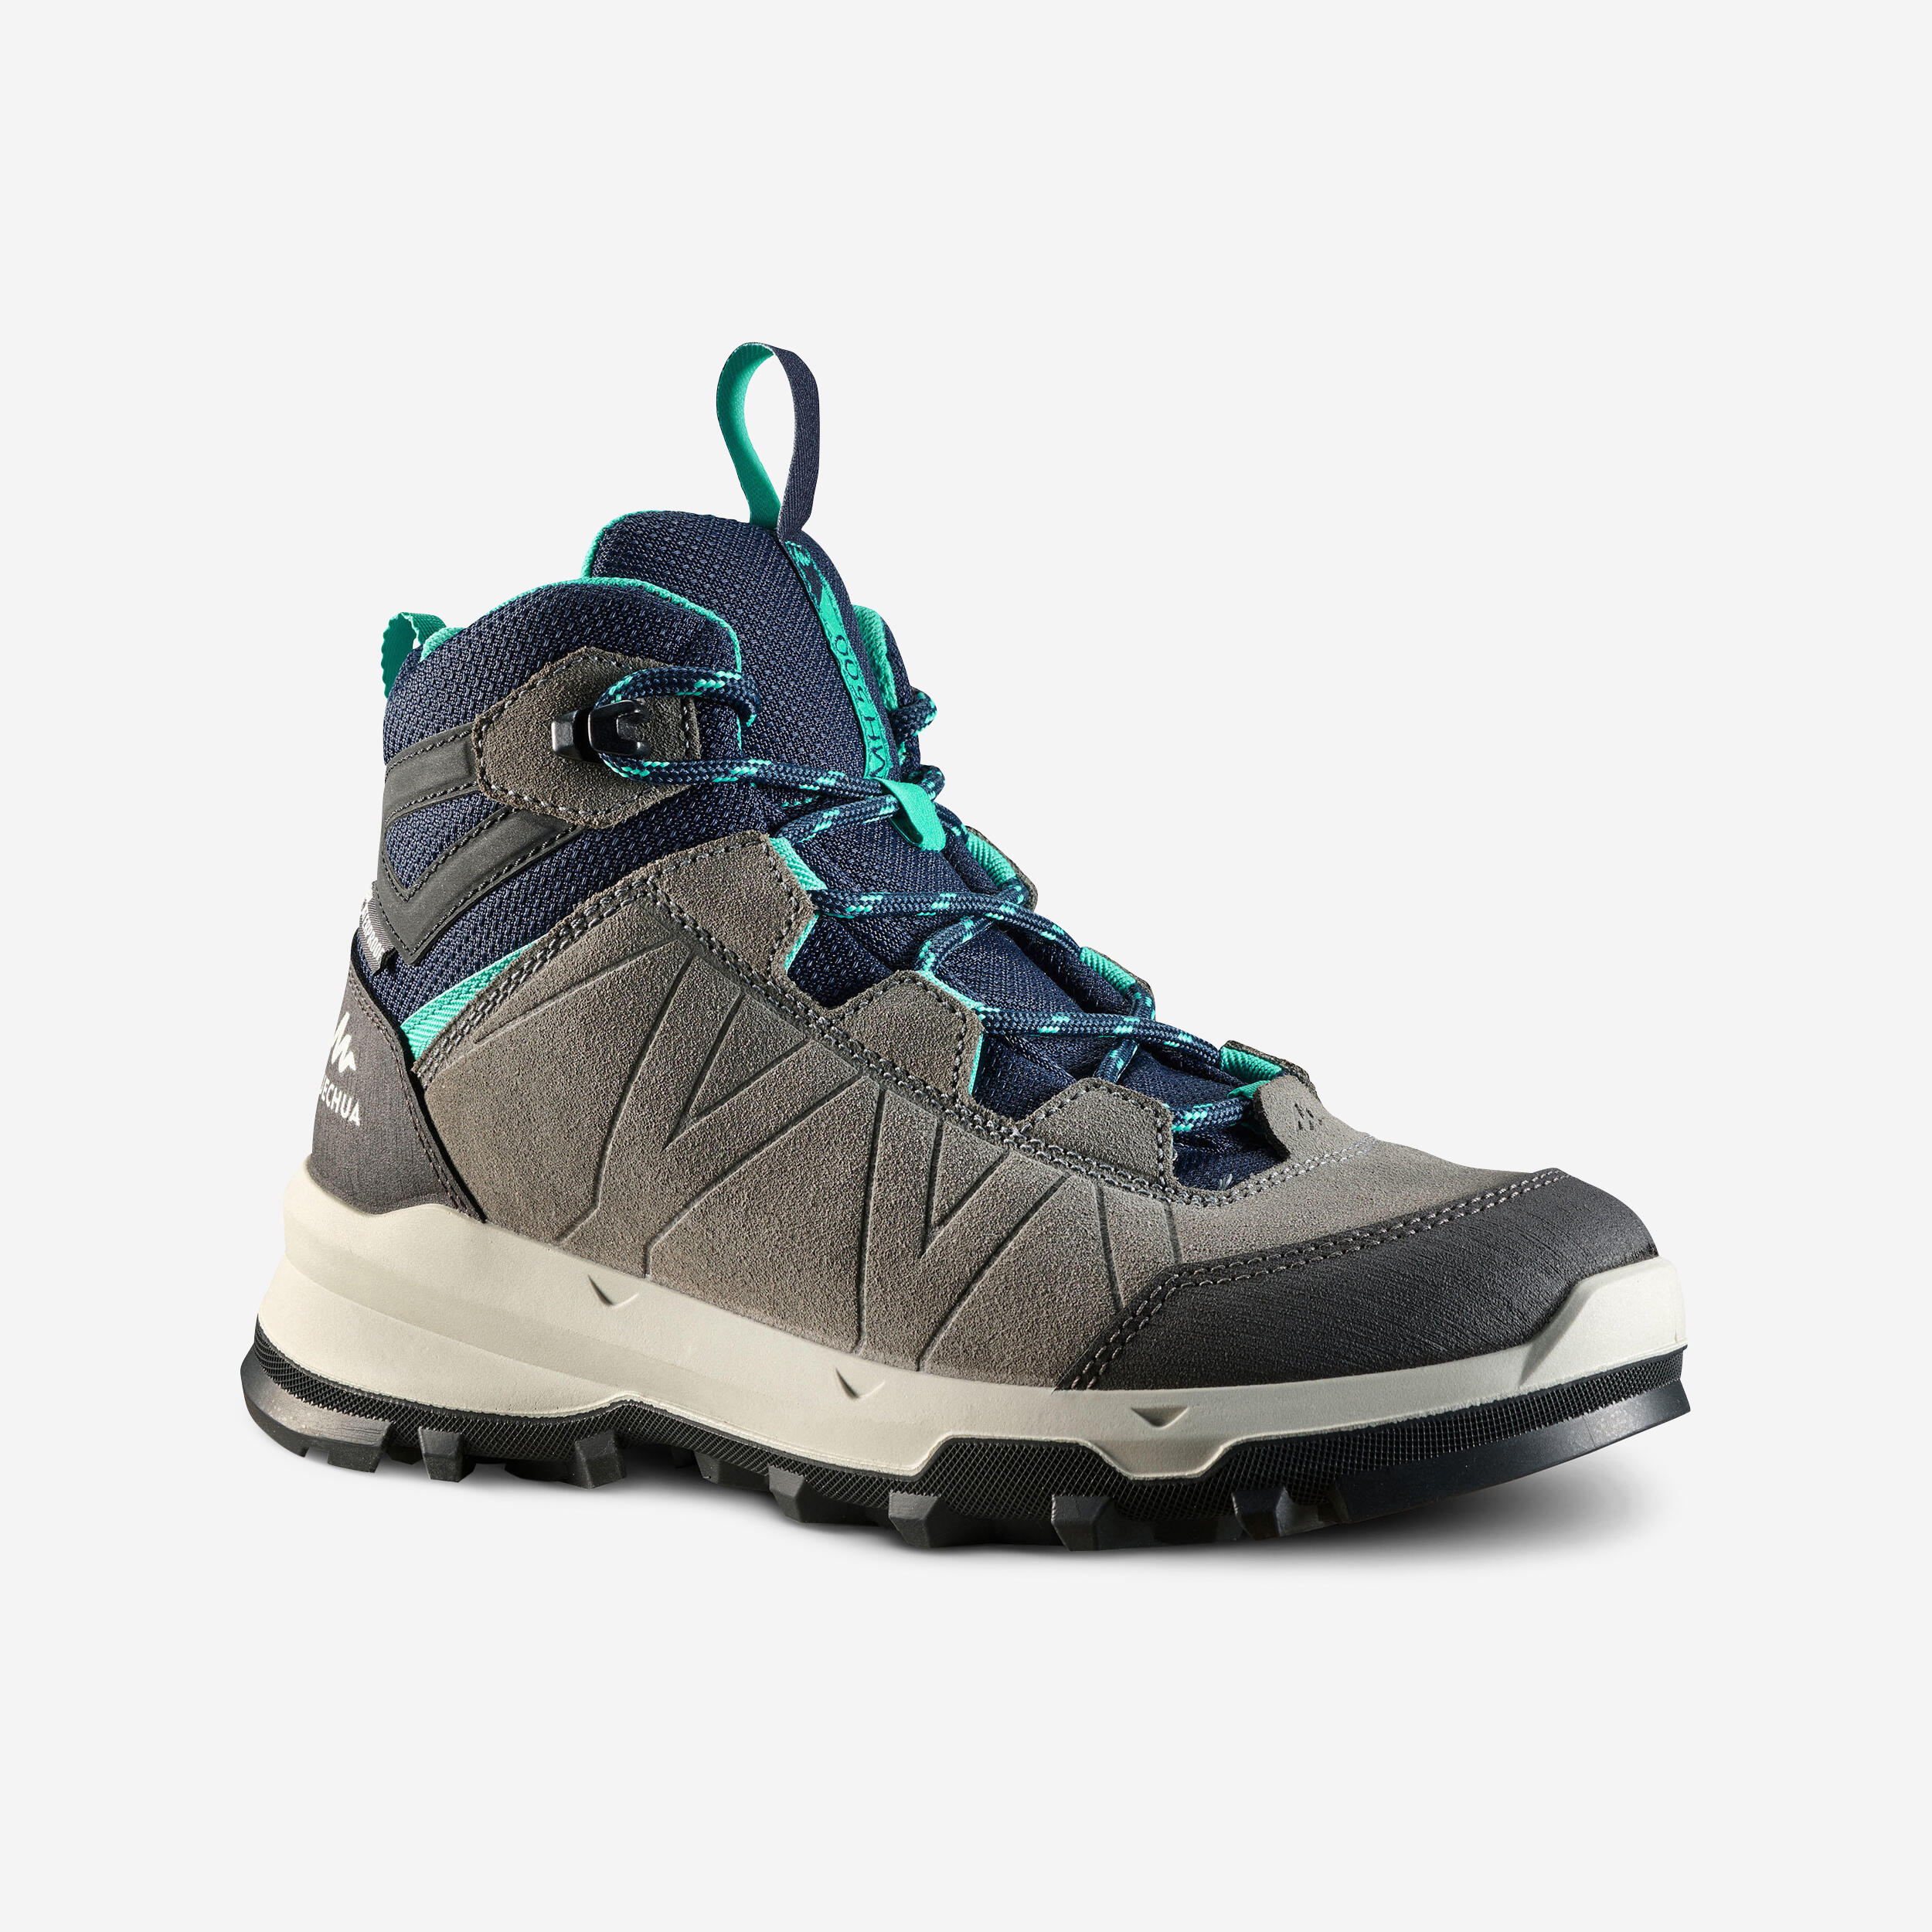 Image of Kids’ Waterproof Hiking Boots - MH 500